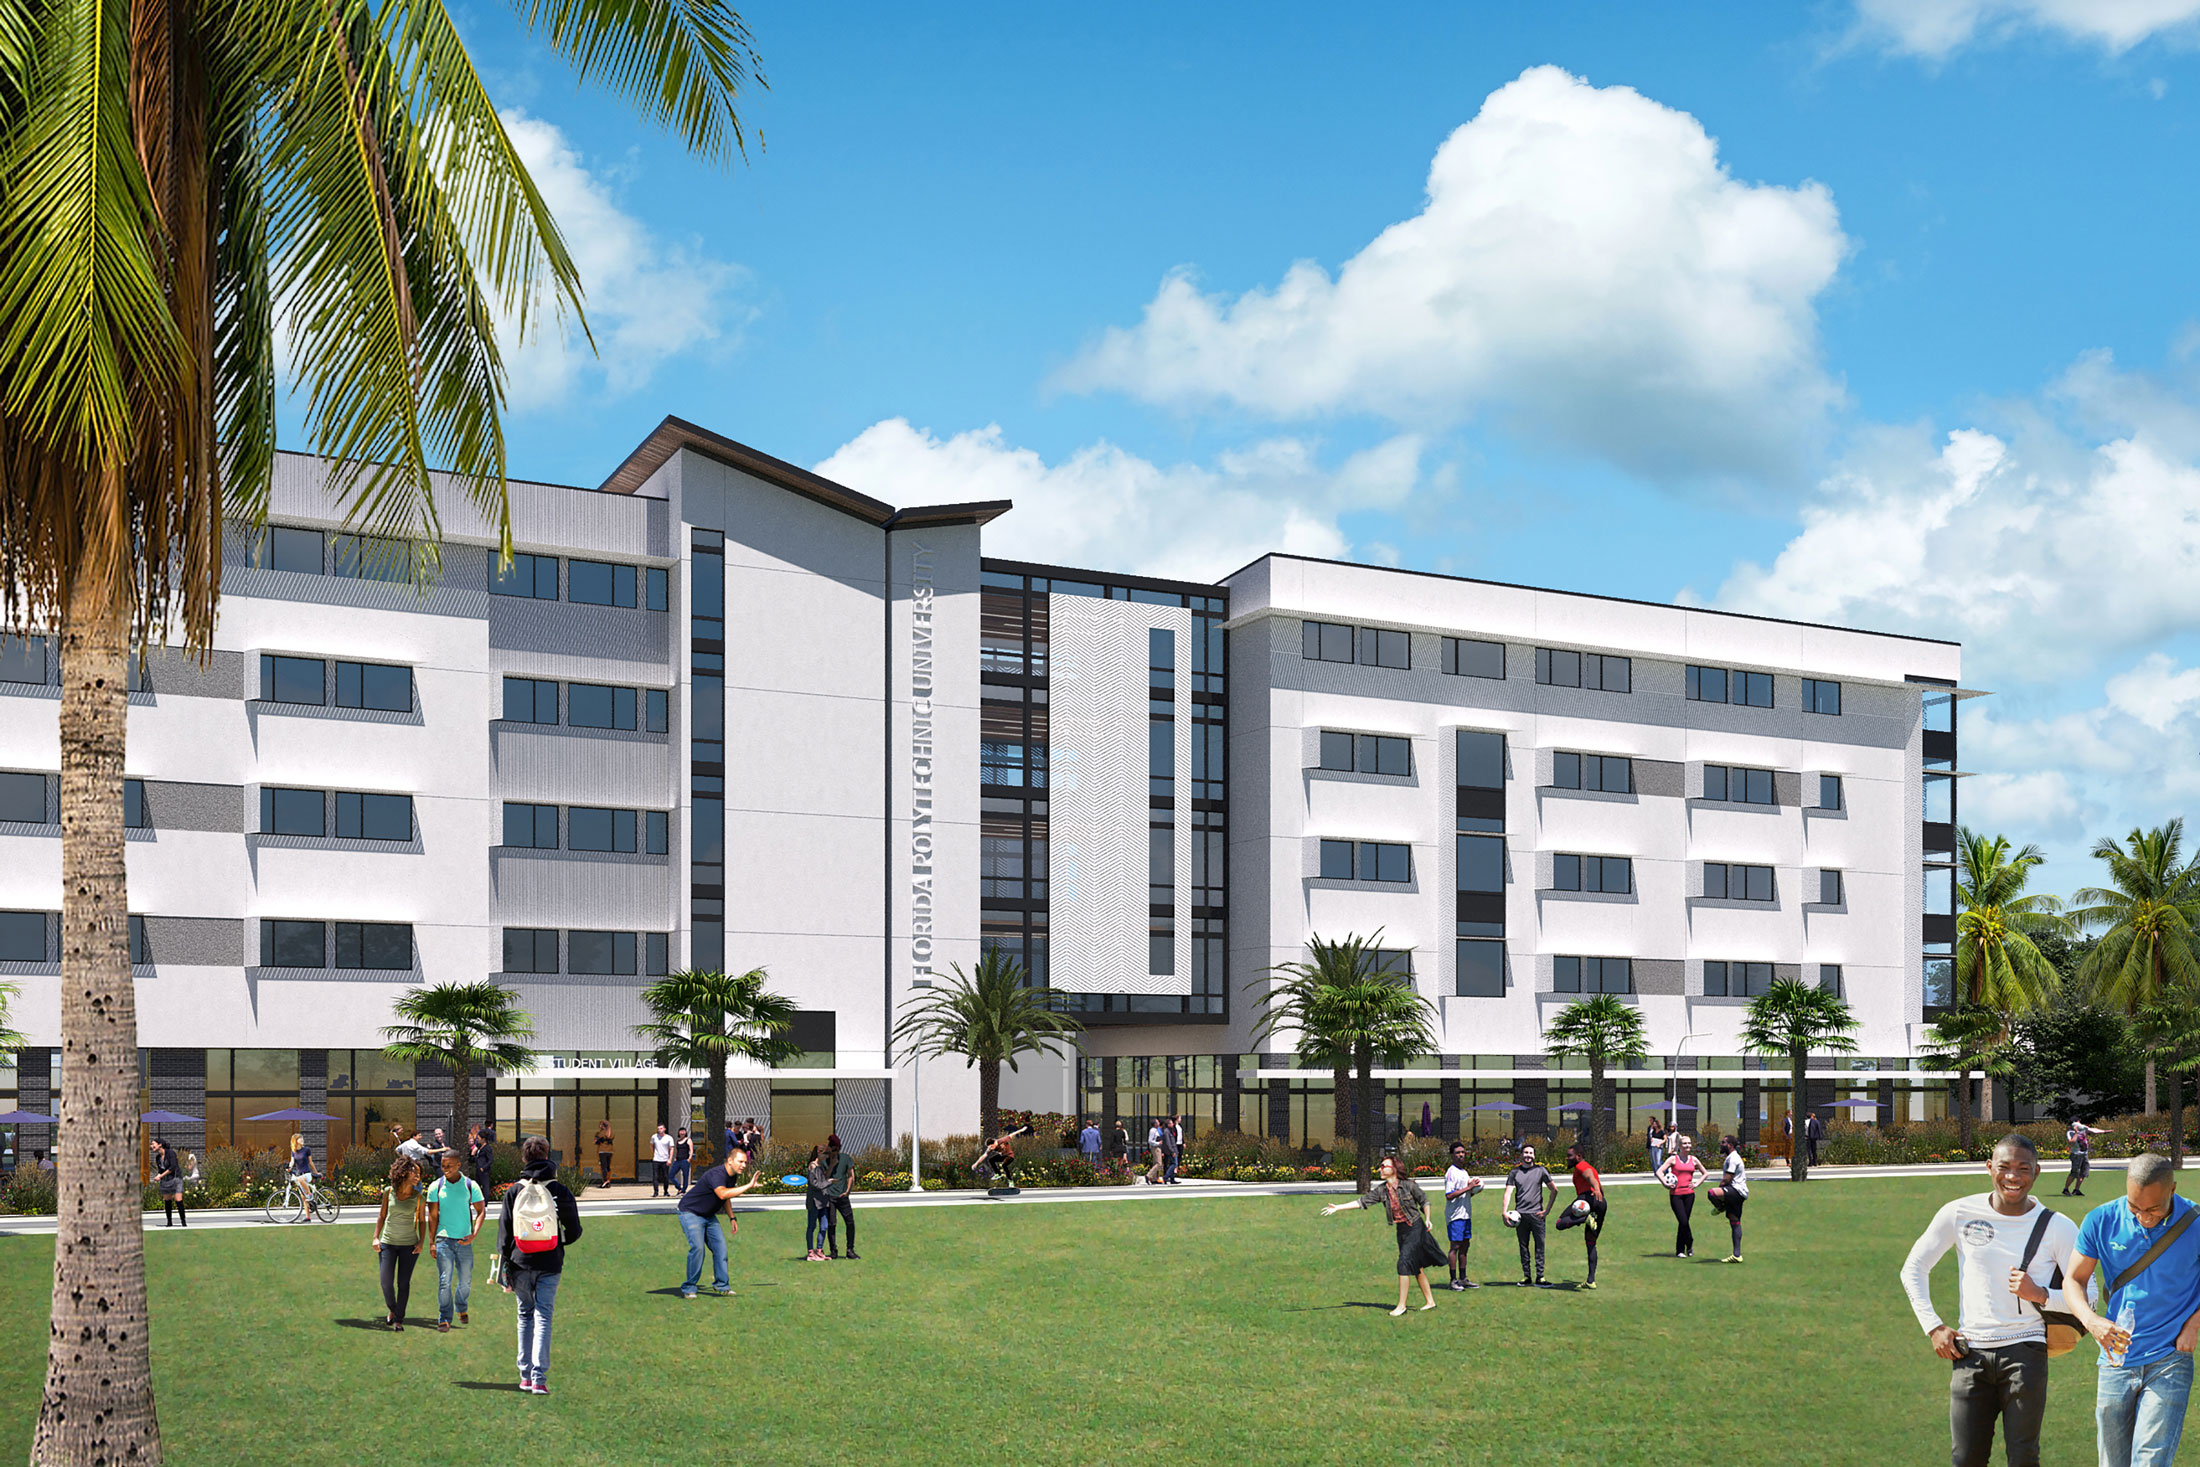 Florida Poly breaks ground on third student residential building